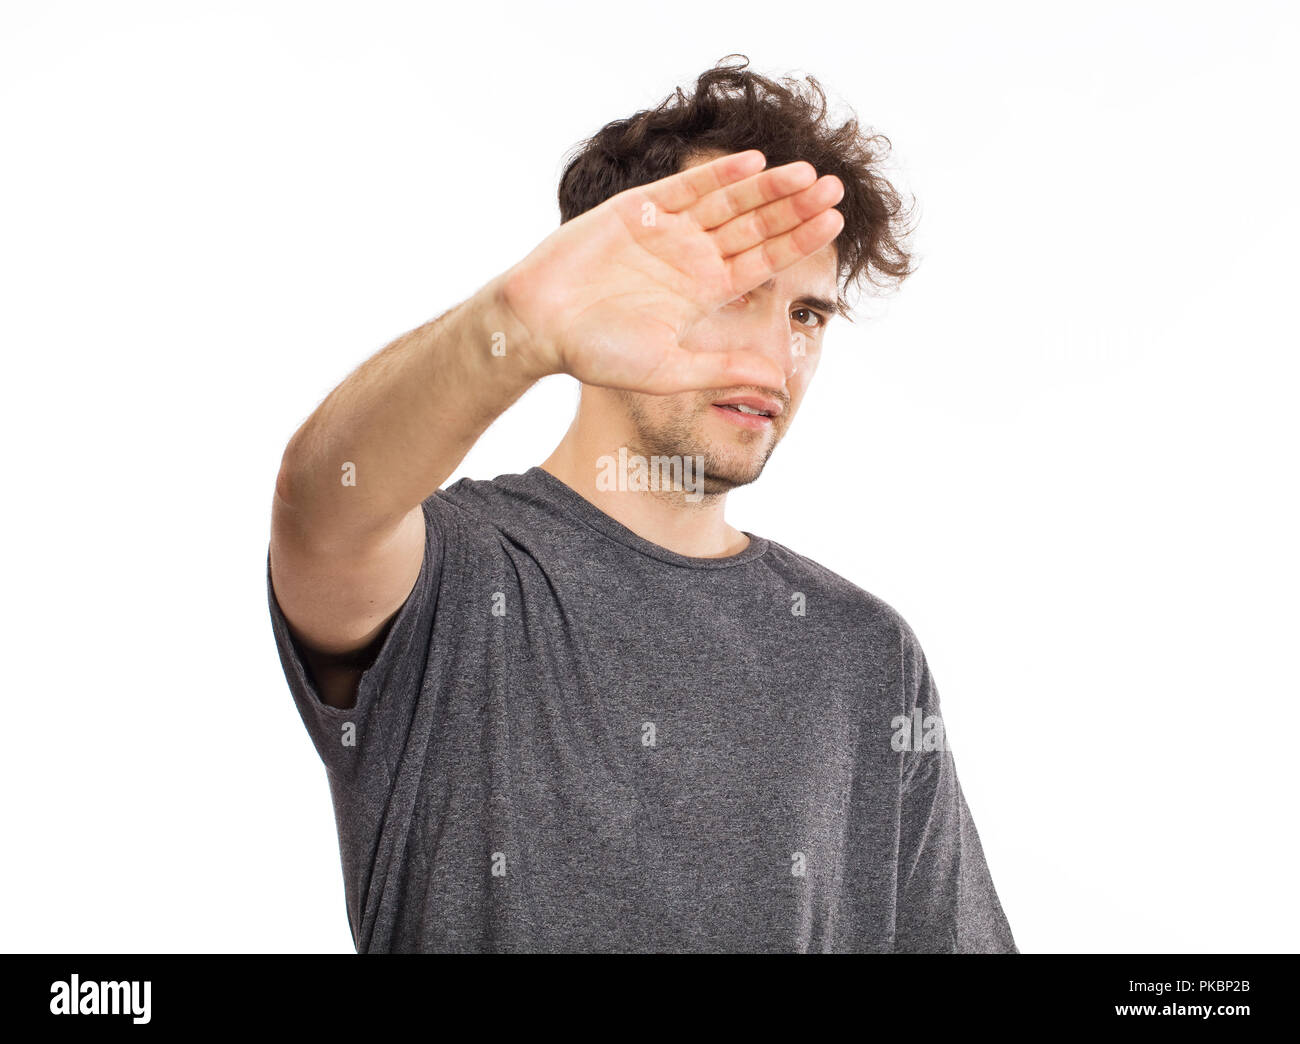 Male protecting face from violence attack Stock Photo